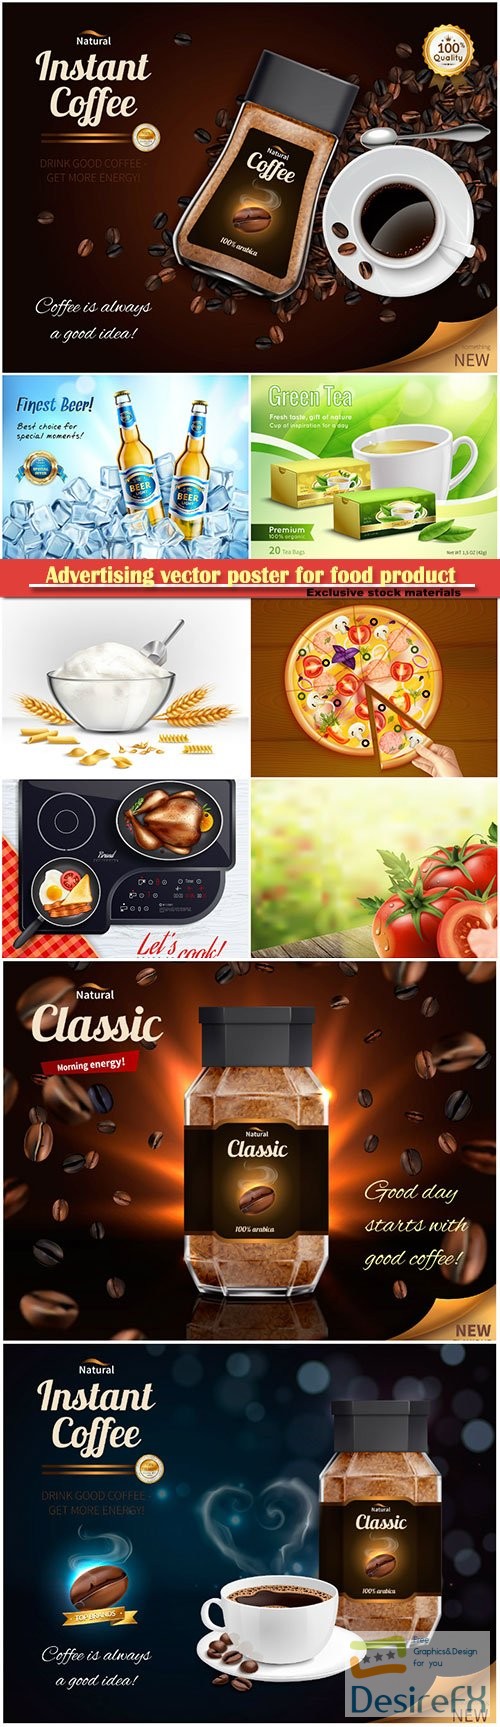 Advertising vector poster for food product